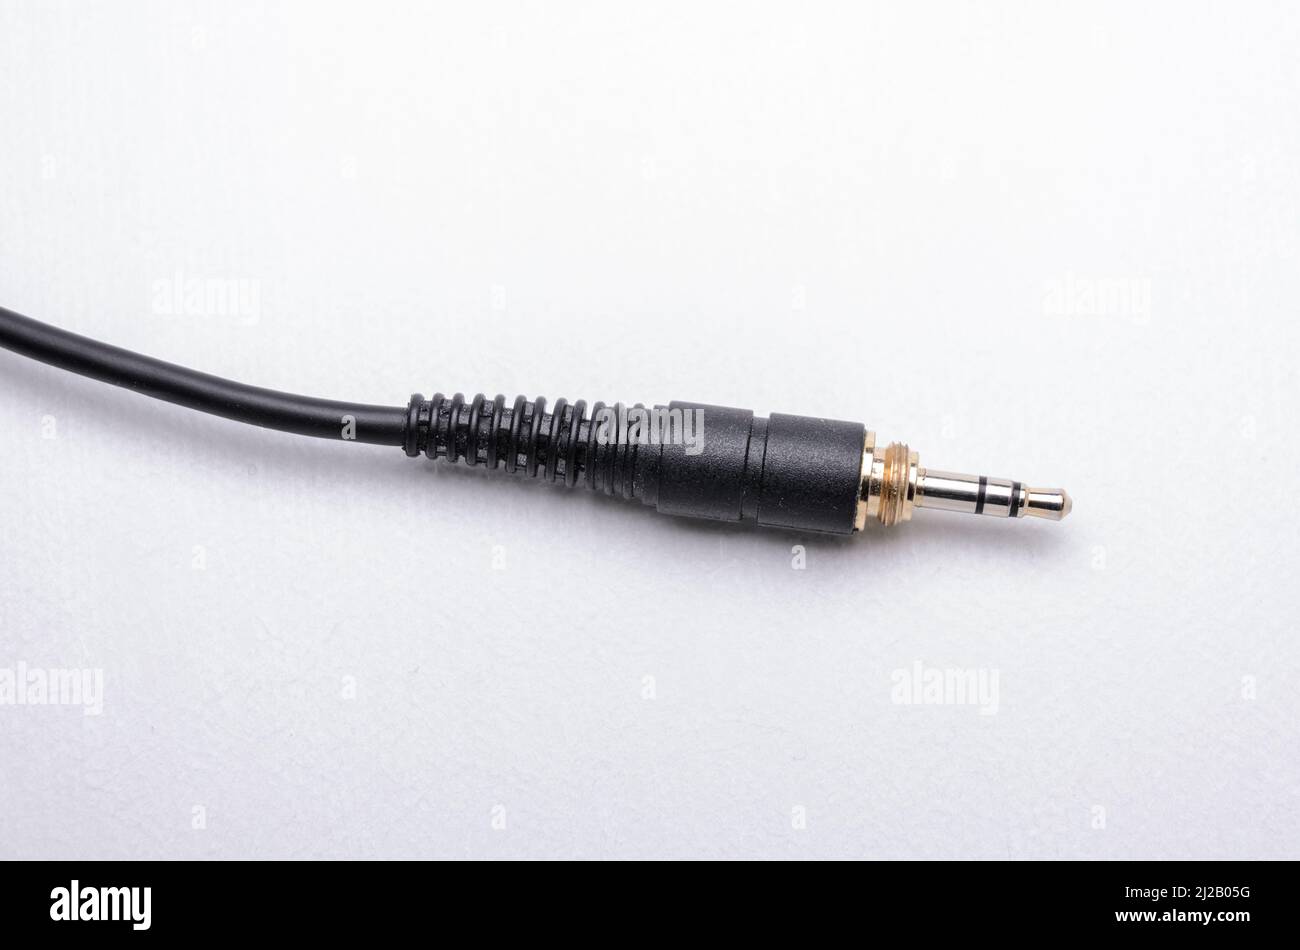 3.5mm stereo headphone jack connector and cable for analog audio signals on white background Stock Photo